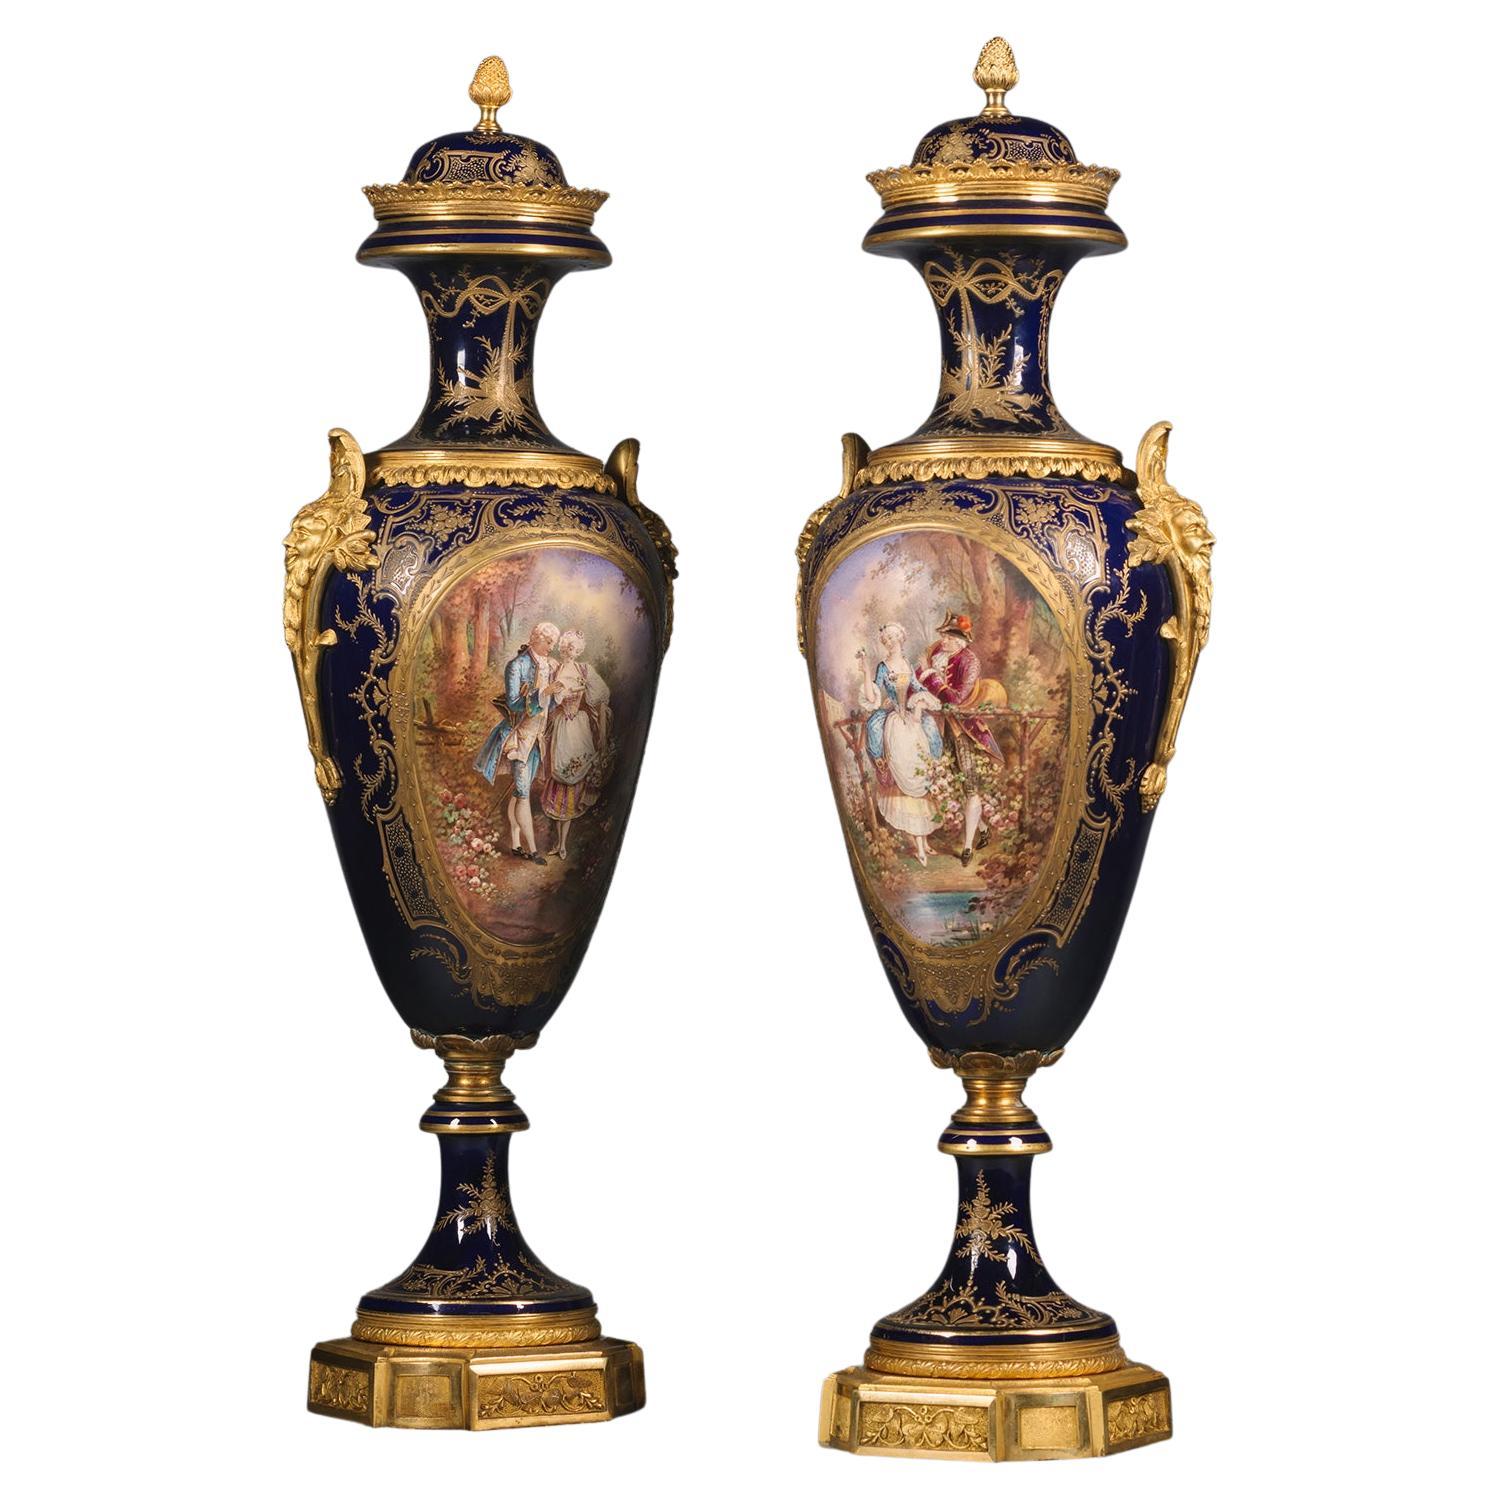 Pair of Gilt-Bronze Mounted Sèvres Style Porcelain Vases and Covers For Sale